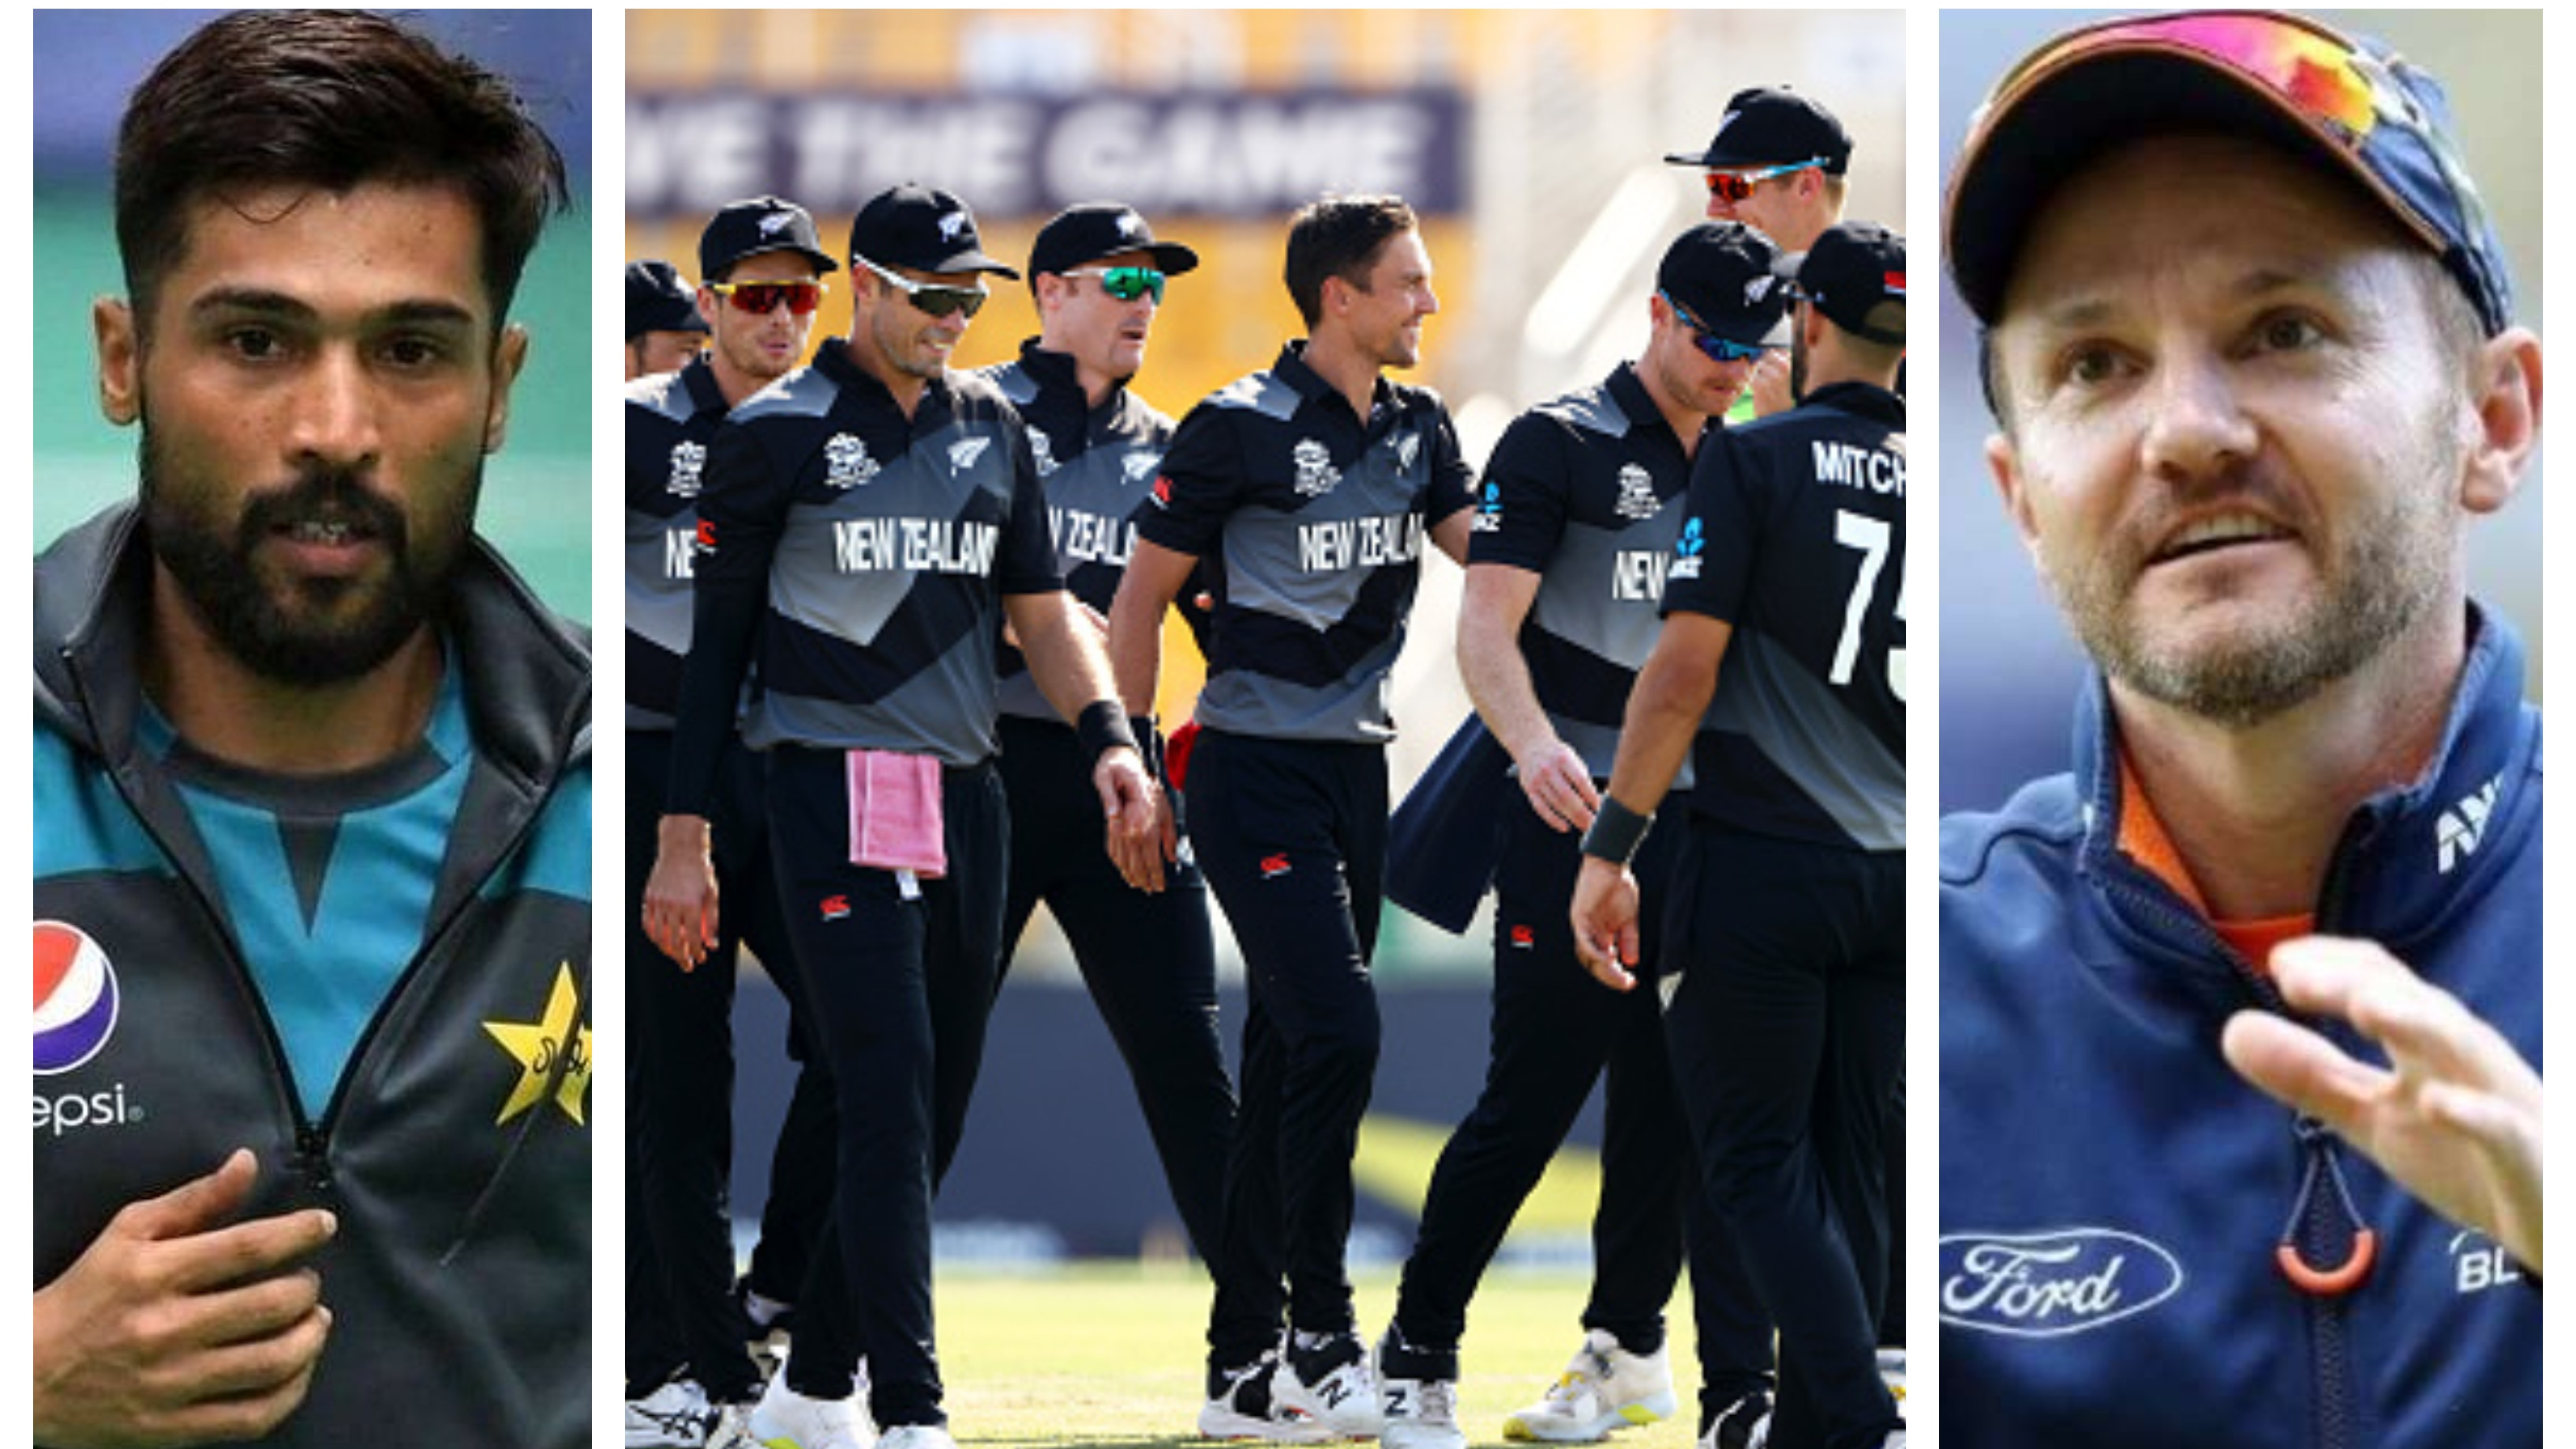 T20 World Cup 2021: Cricket fraternity reacts as New Zealand qualify for semis with convincing win over Afghanistan